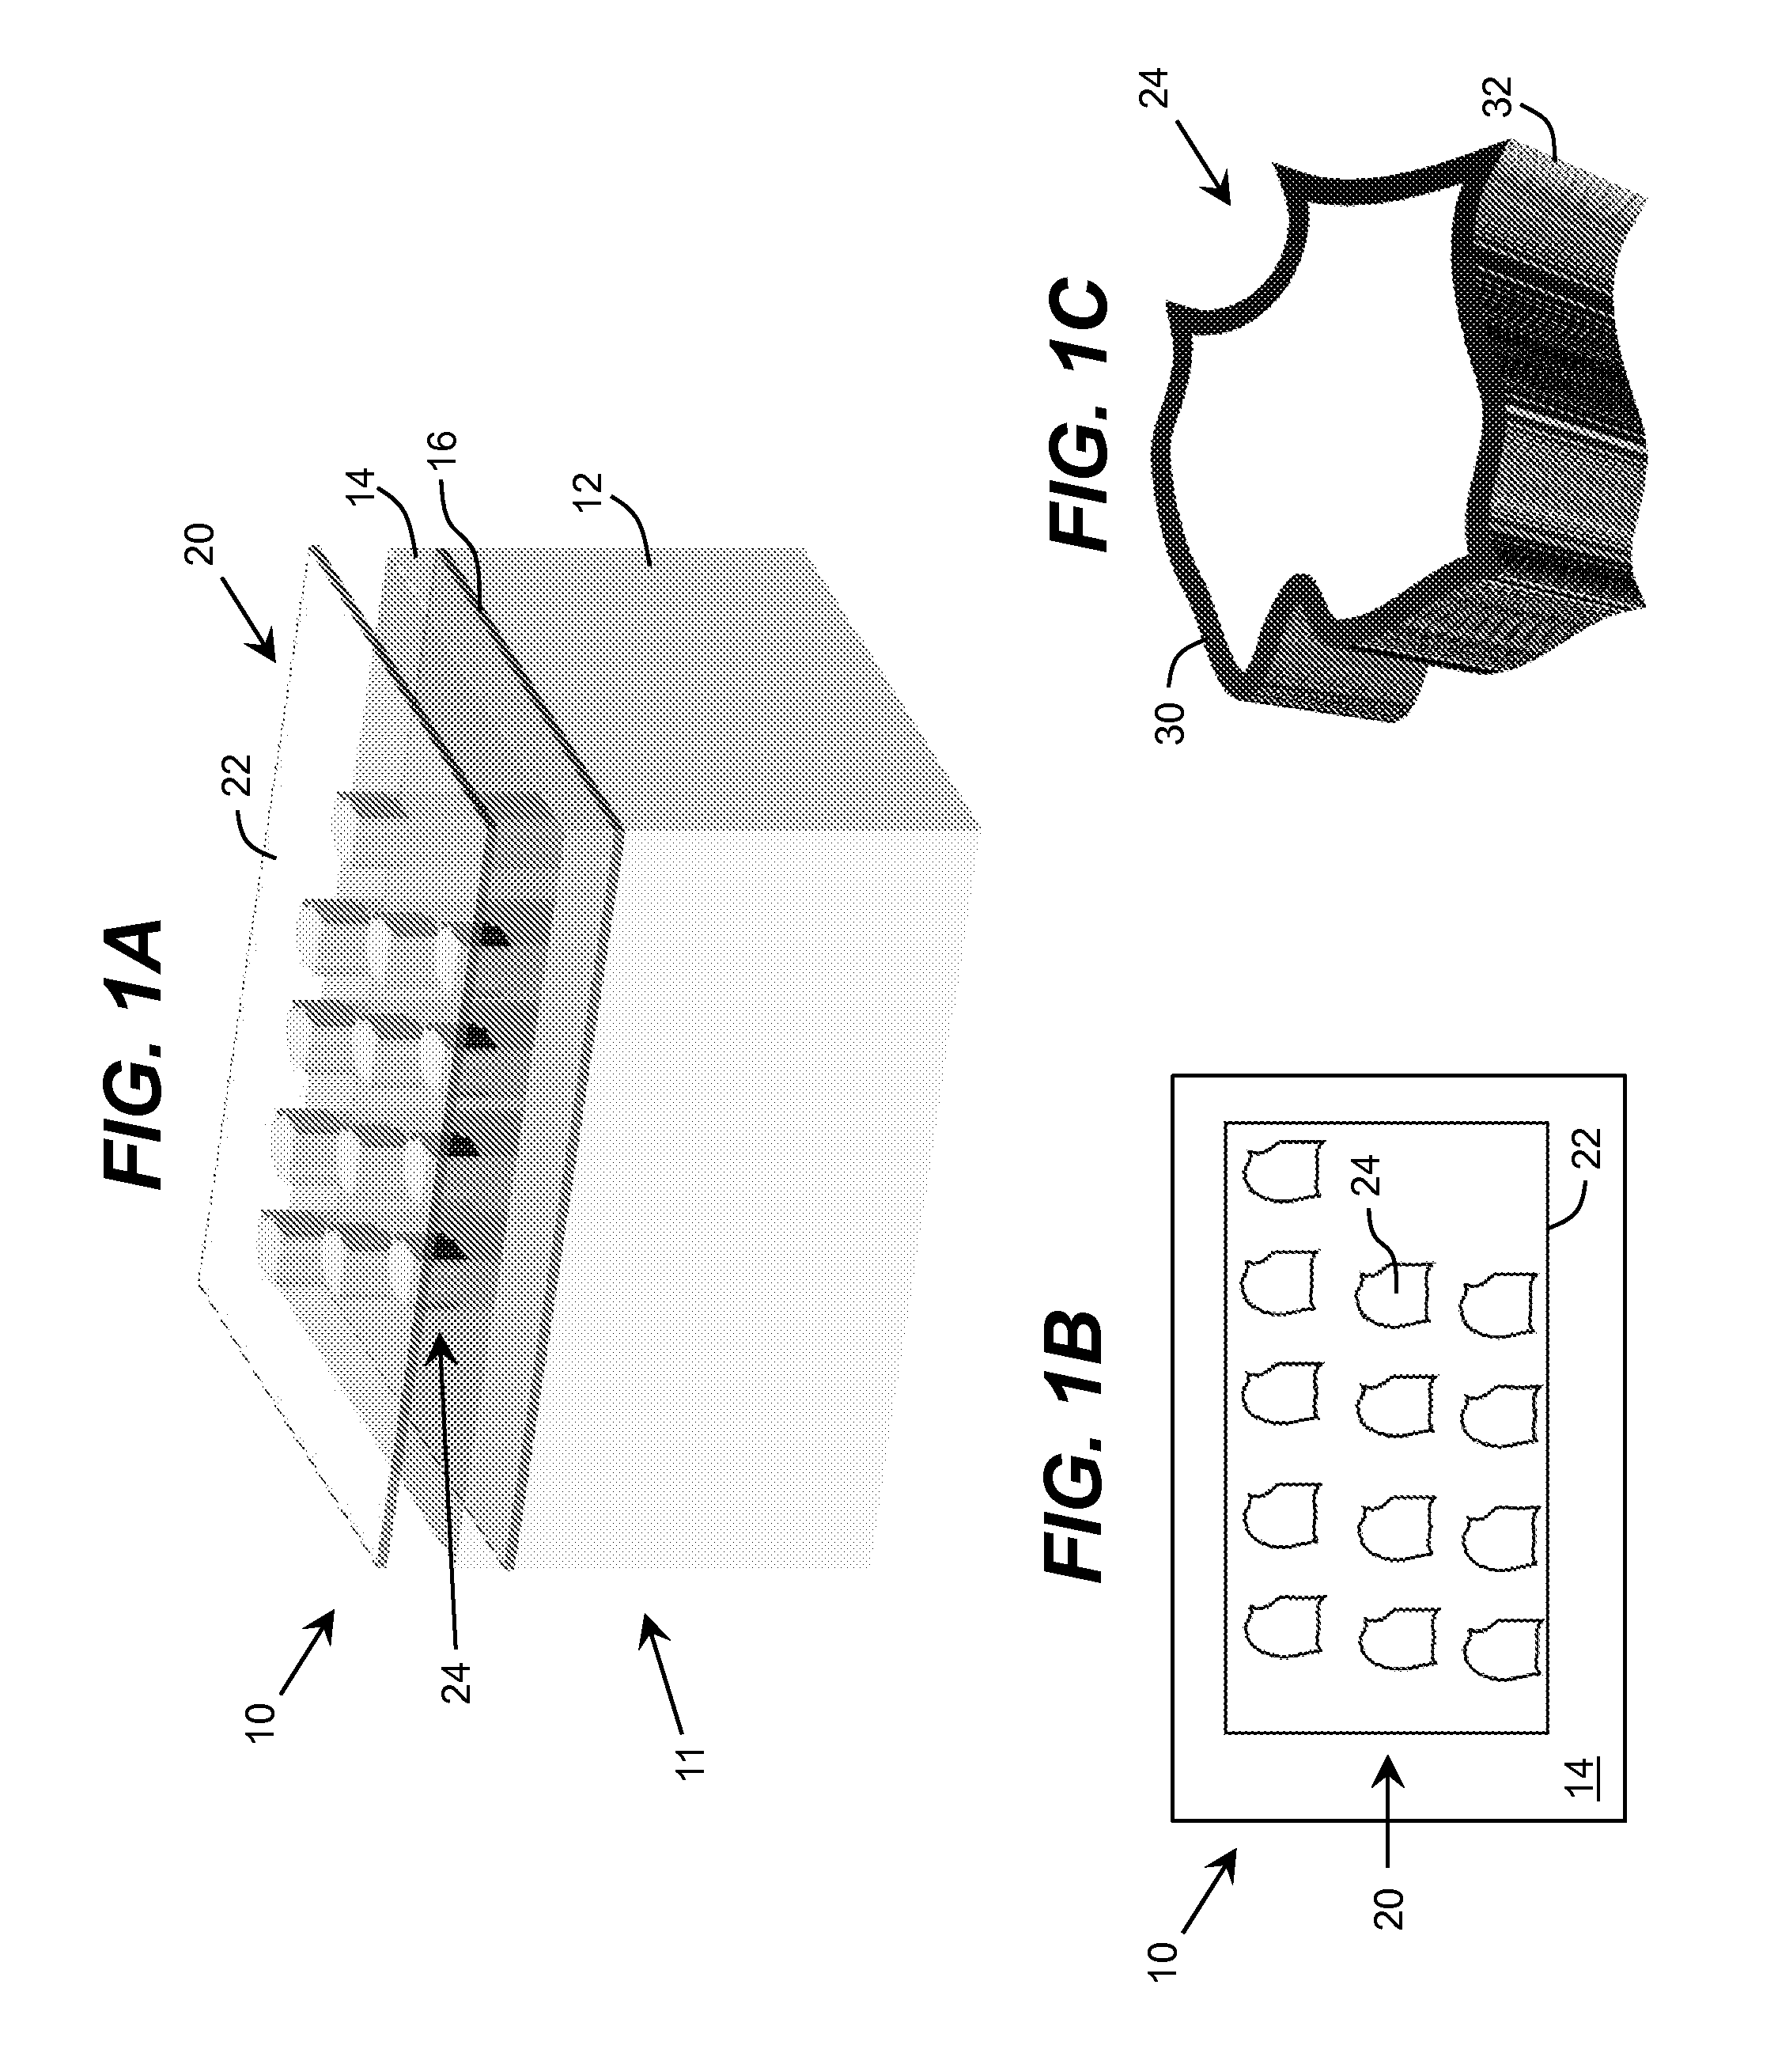 Ohmic Contact to Semiconductor Layer